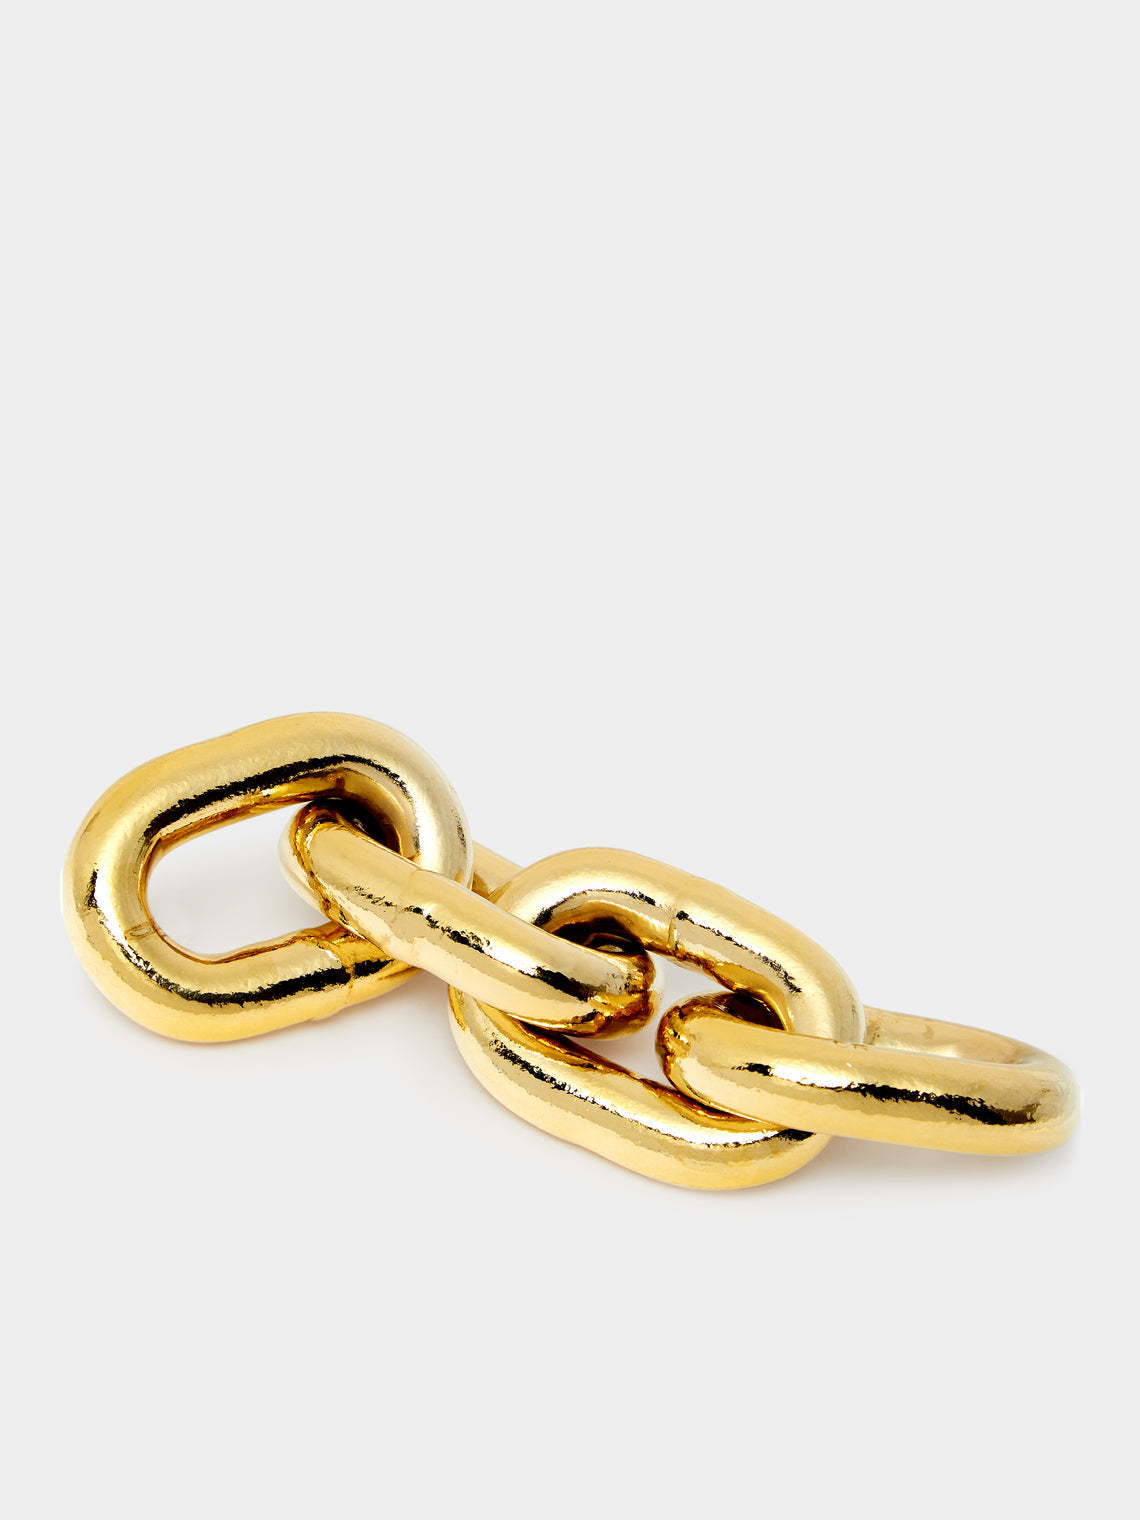 Carl Auböck - Brass Chain Link Paperweight - Gold - ABASK